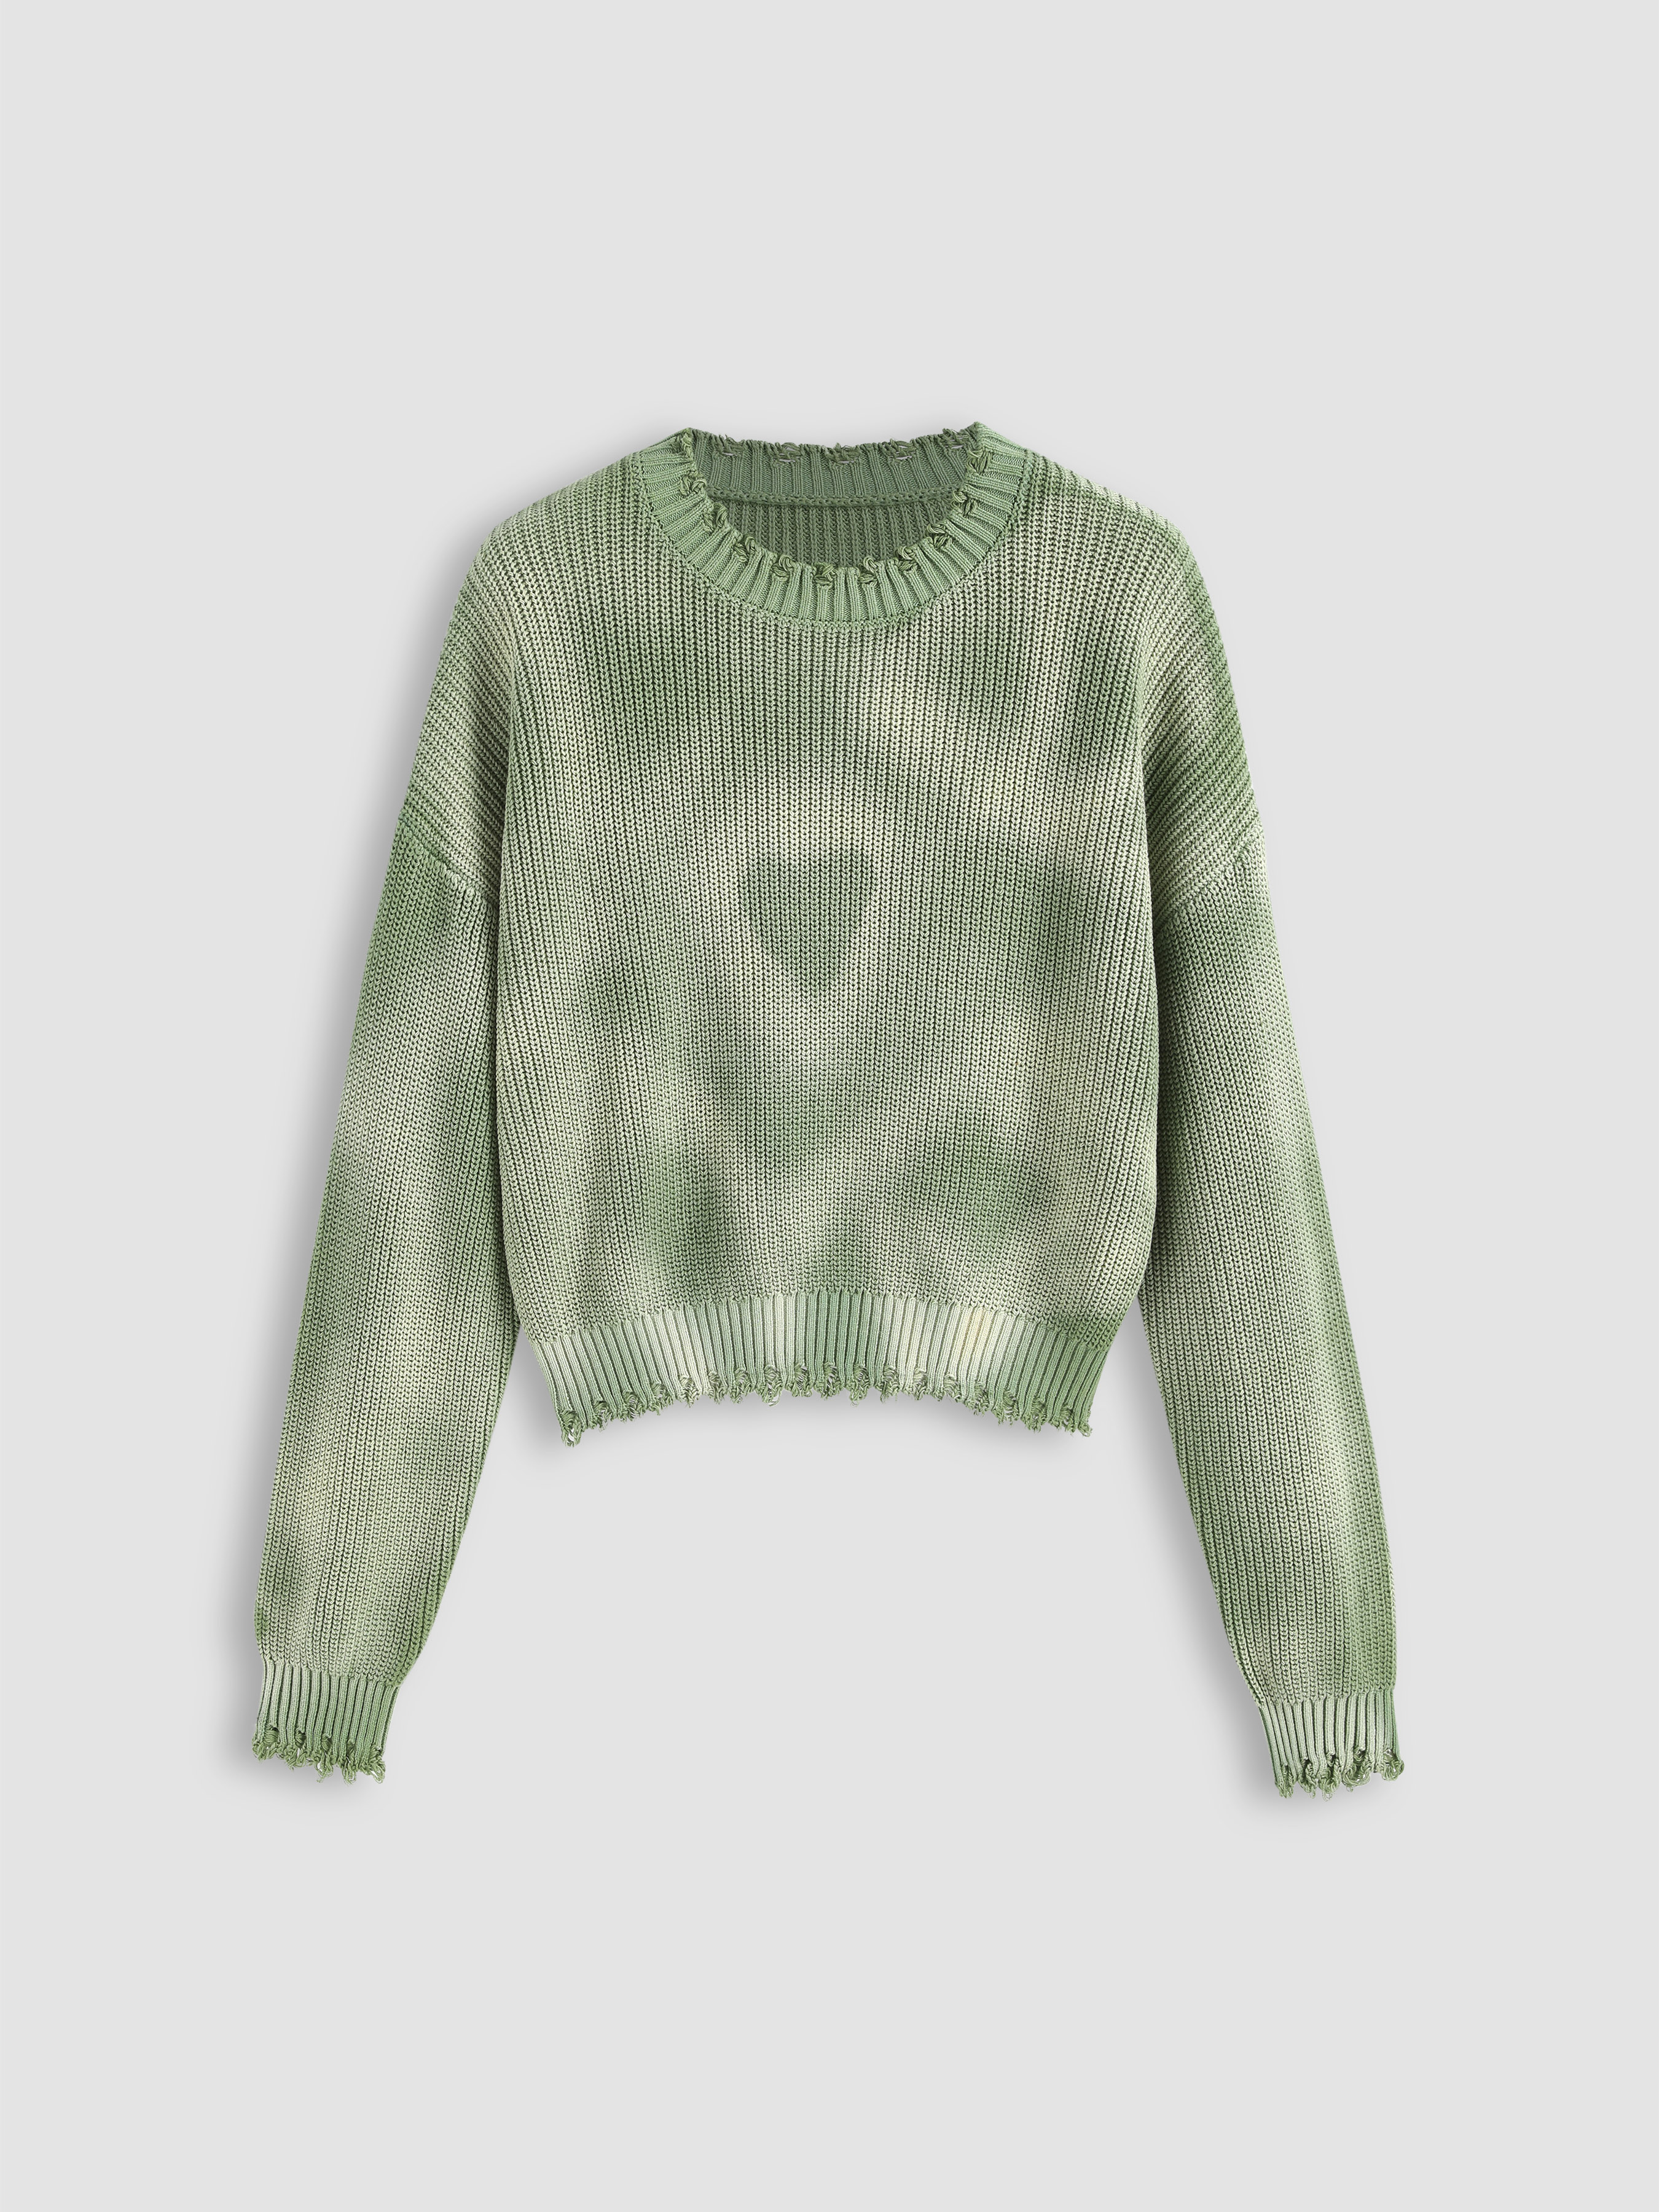 See Your Aura Distressed Sweater - Cider